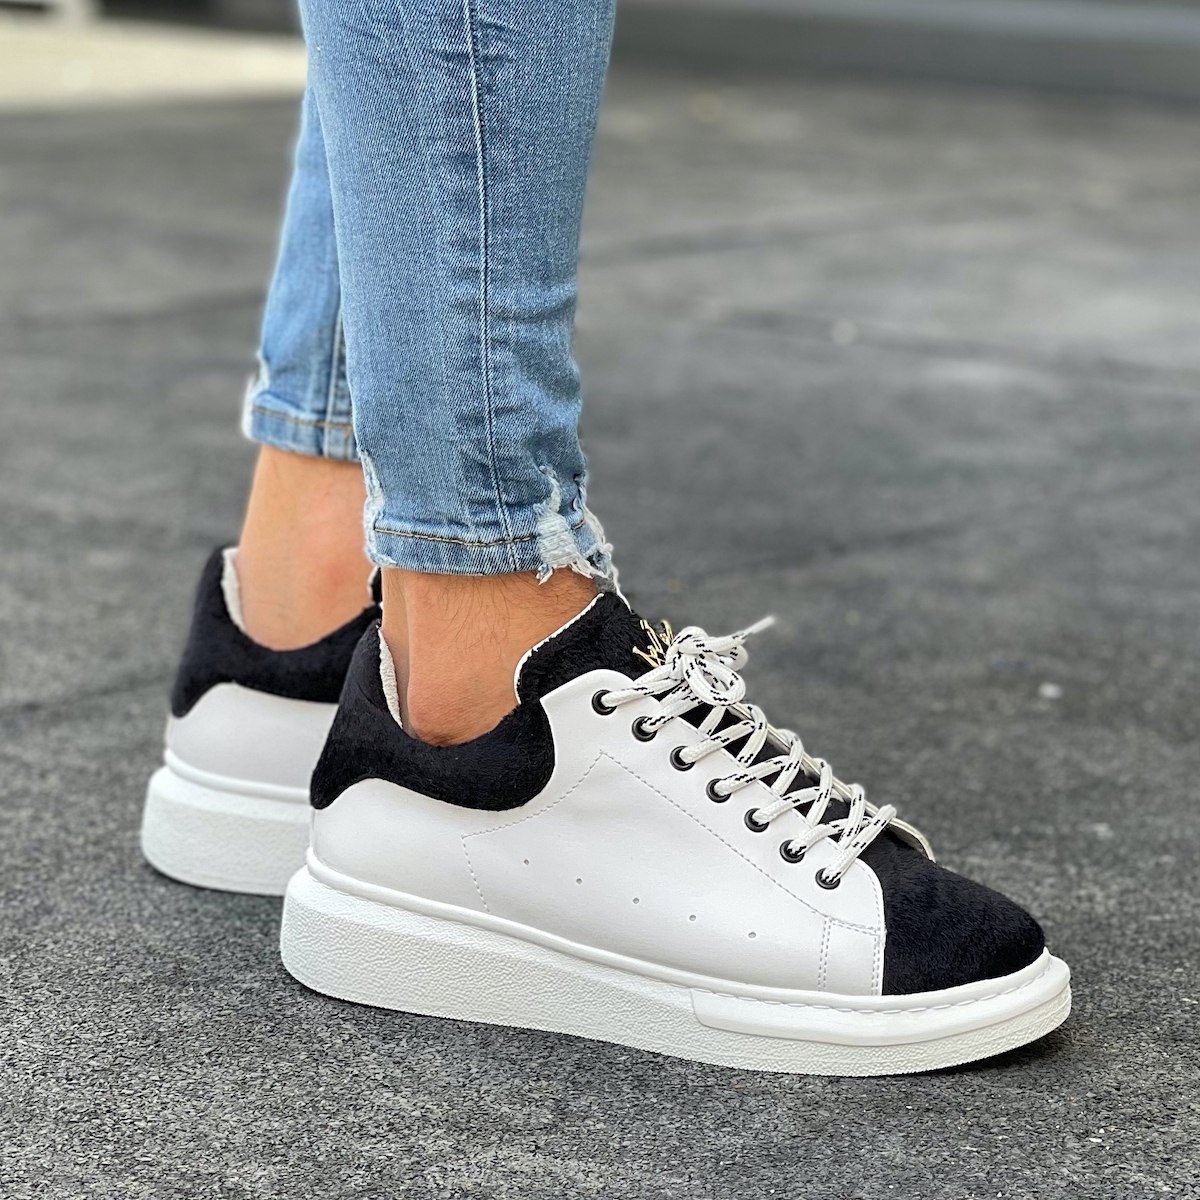 Hype Sole Sneakers in White-Partial Short Black Fur - 1